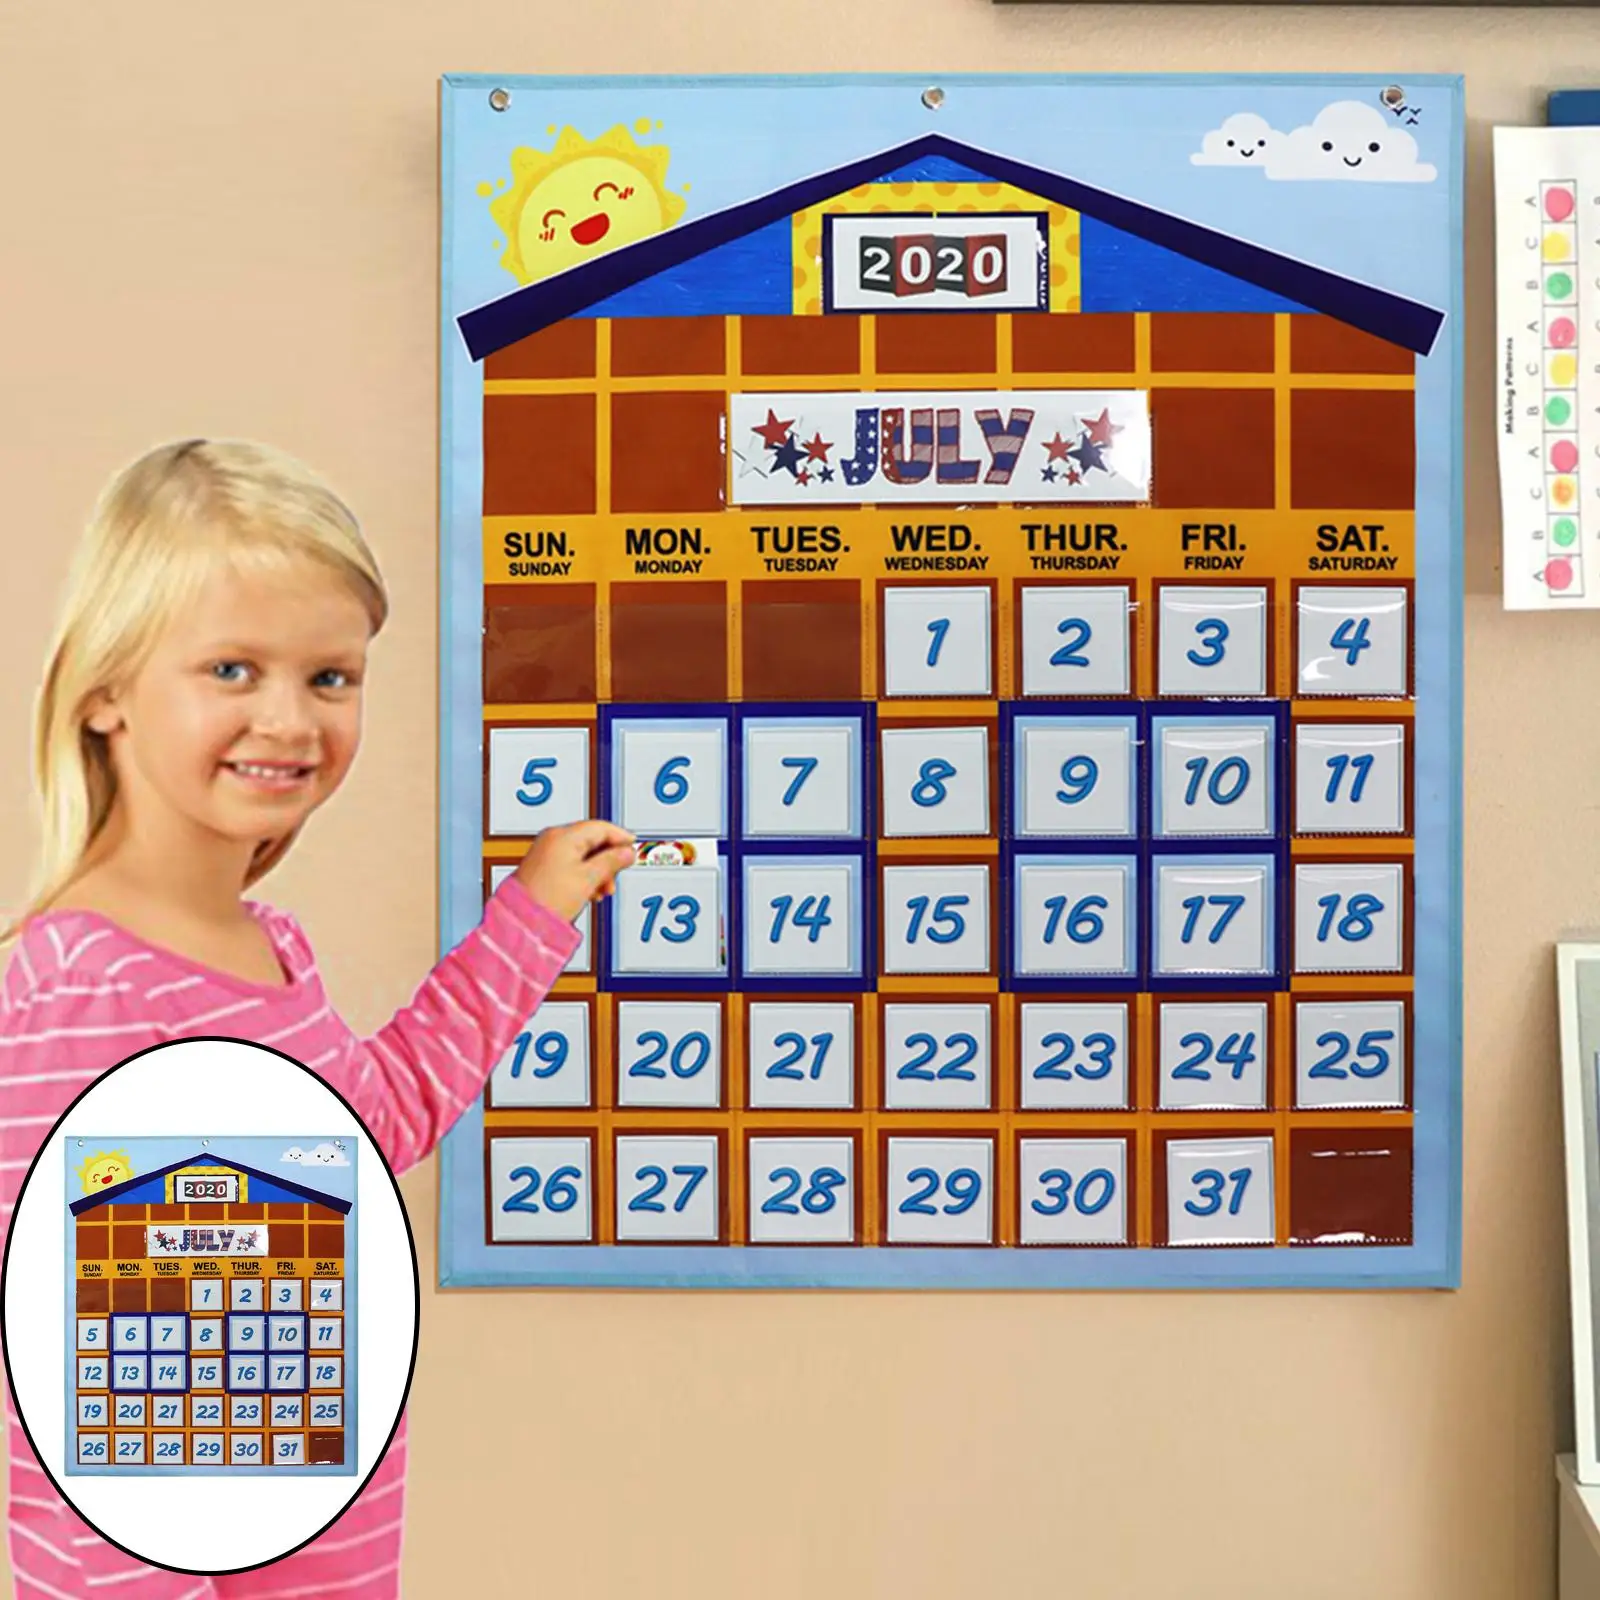 Monthly Wall Calendar Hanging Bag Memory for Office Students